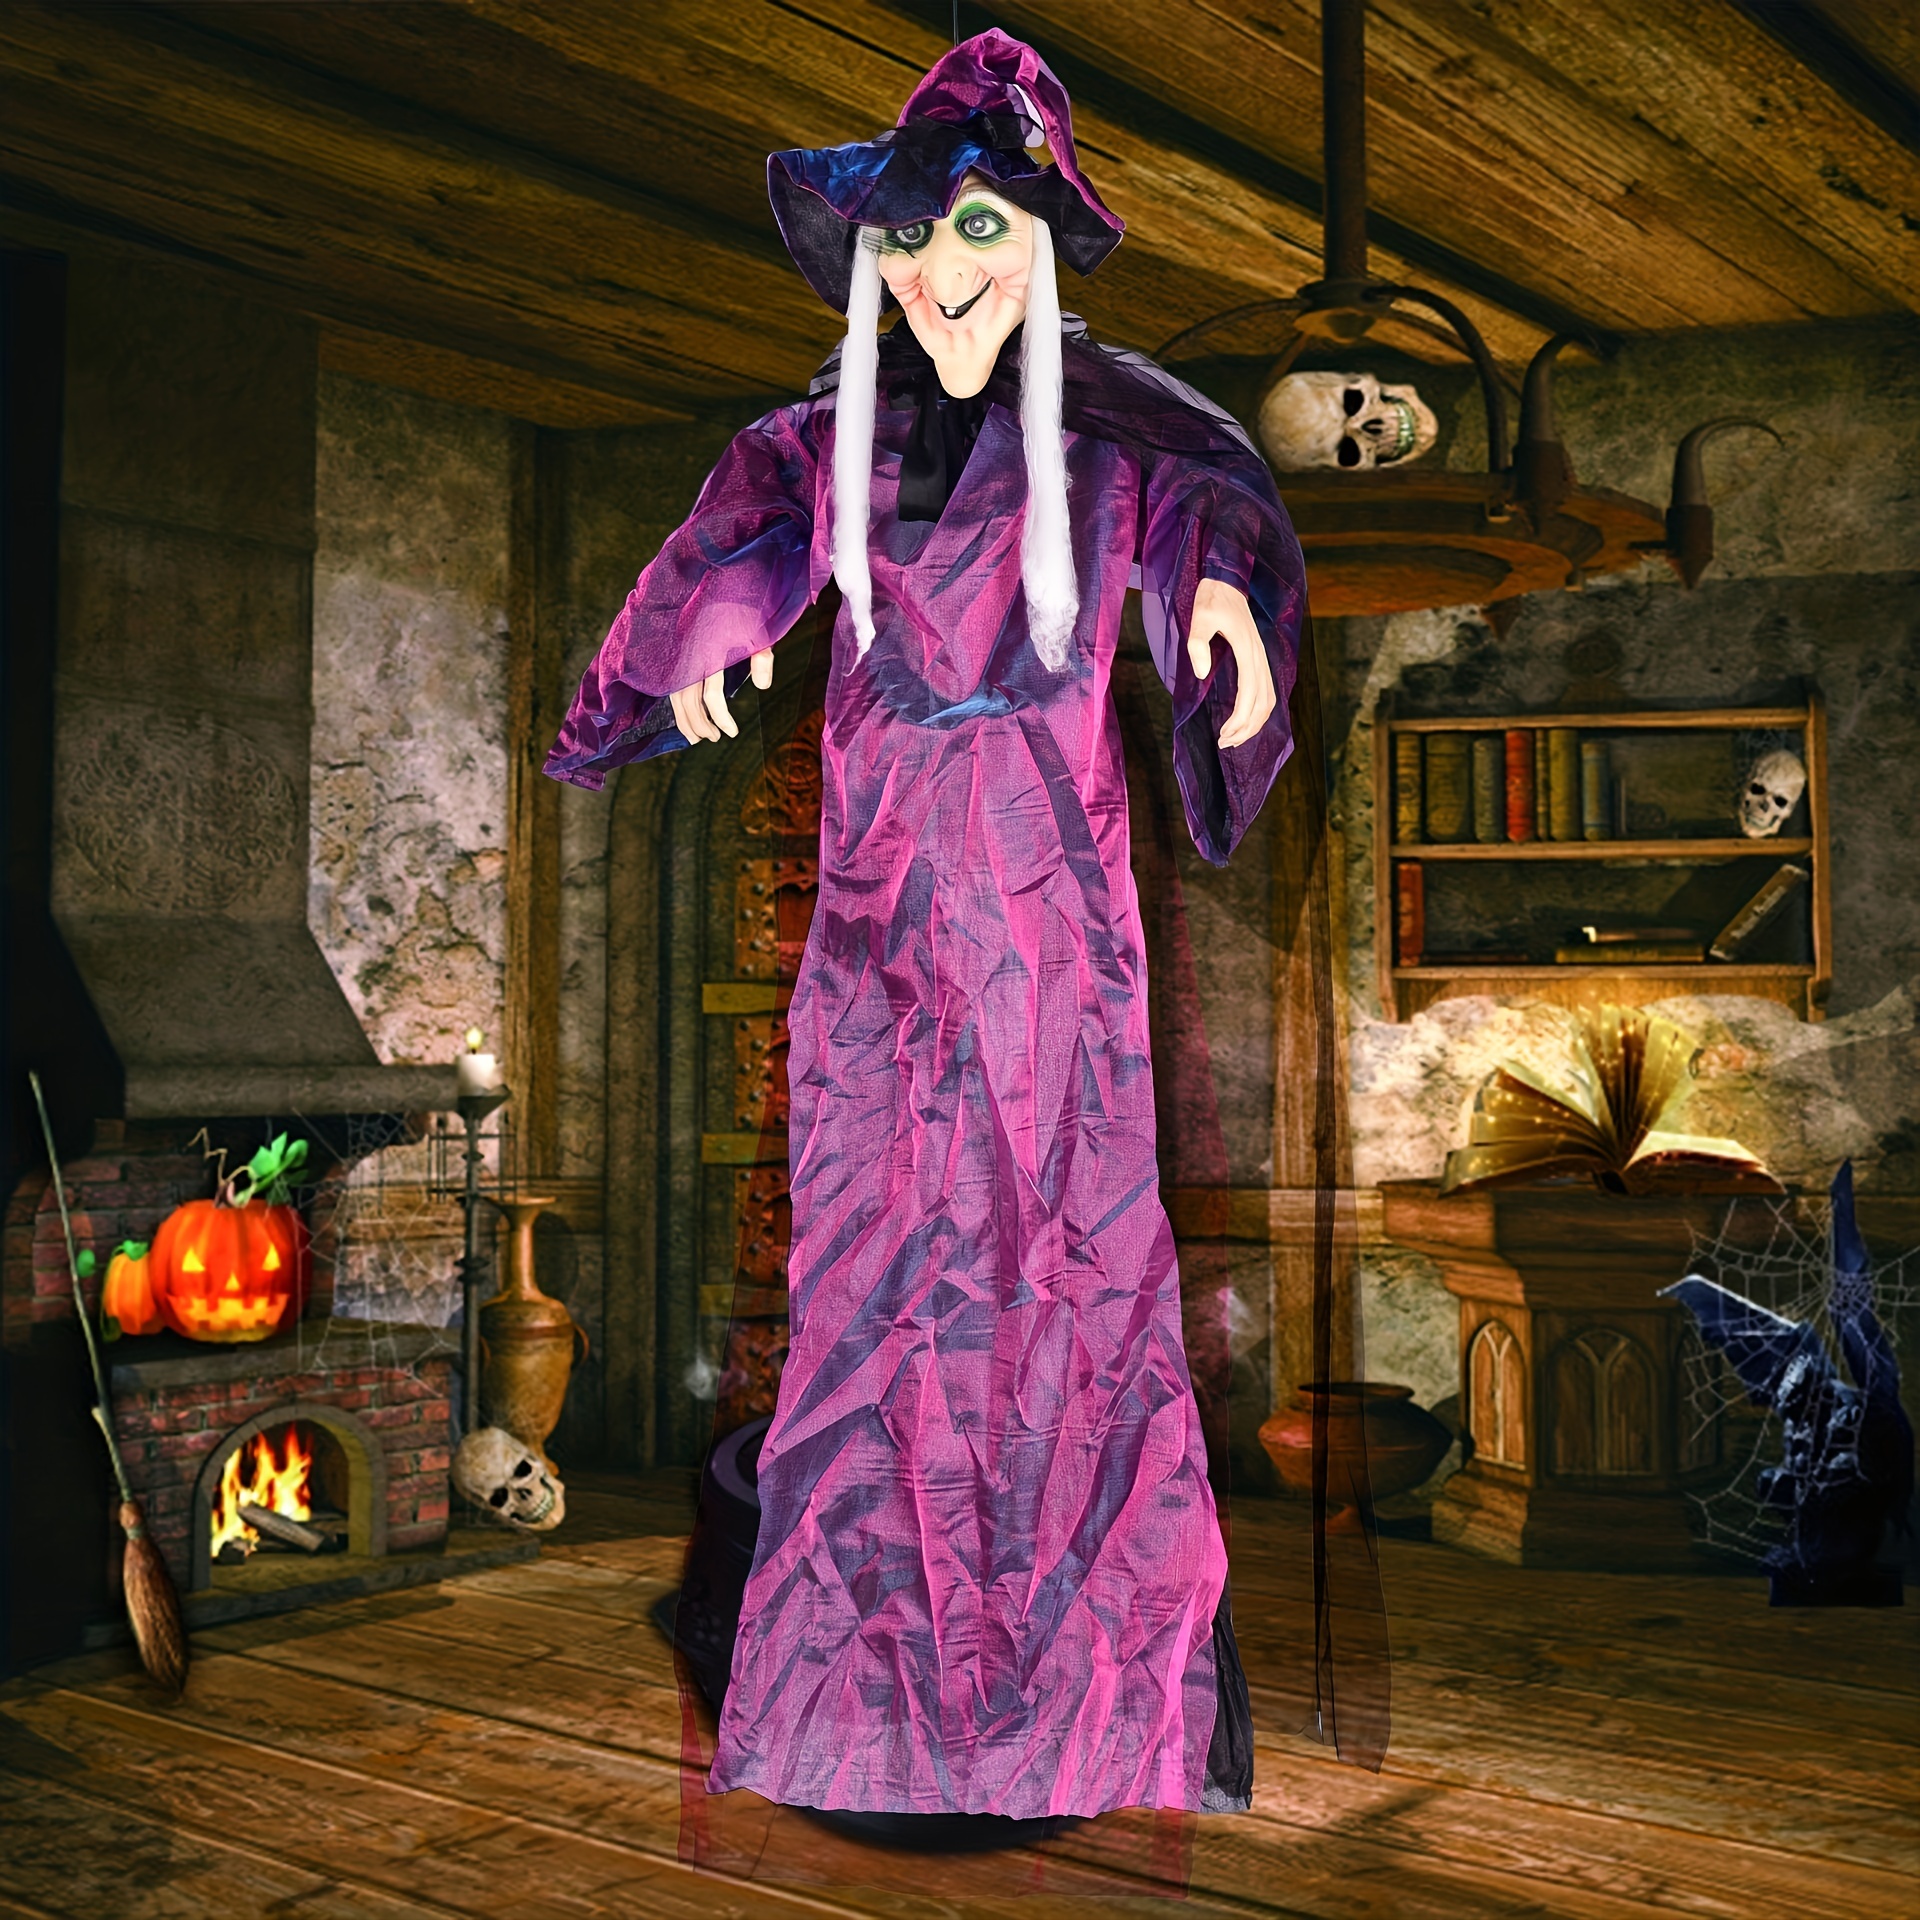 

1pc Hanging Witch Prop, 70.86 Inches Tall, Sound-activated, Light-up & Voice Features, Fabric And Latex Construction, Haunted House And Horror Theme Decor For Bars And Party Settings